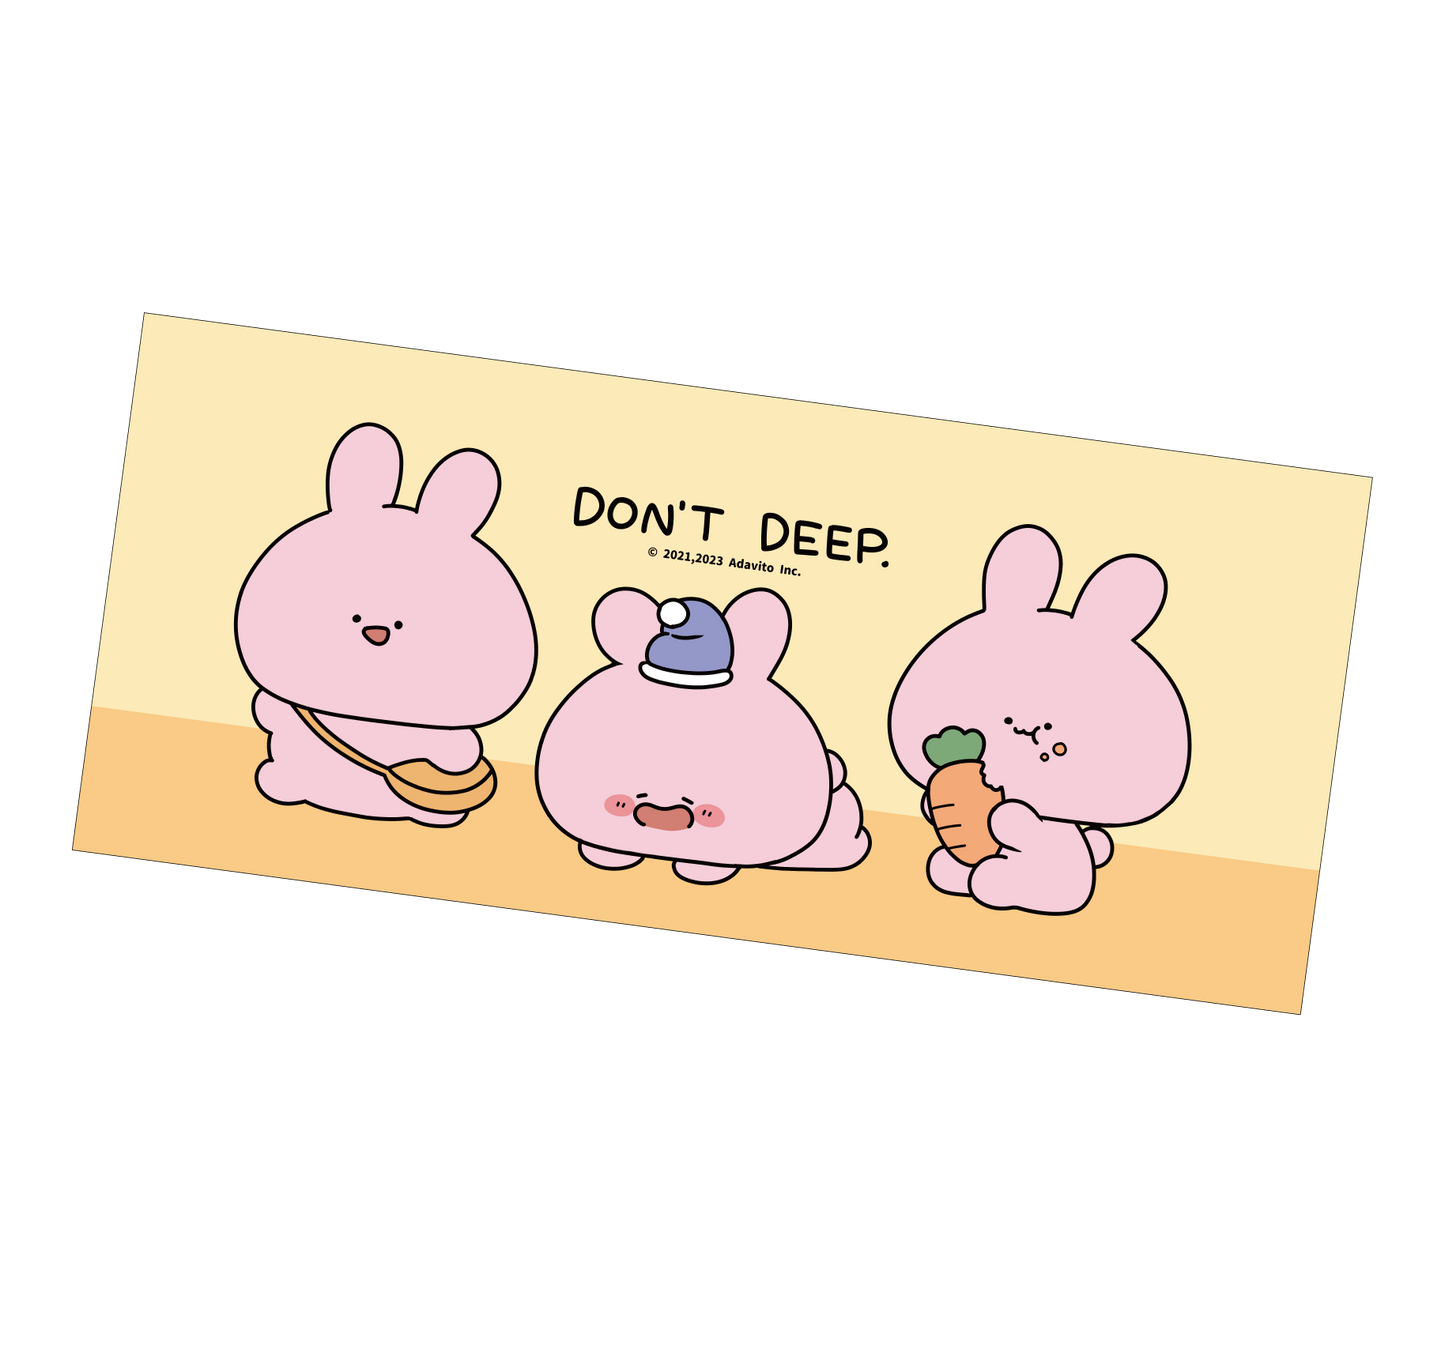 [Asamimi-chan] Face towel (Don't deep) [Shipped in early March]